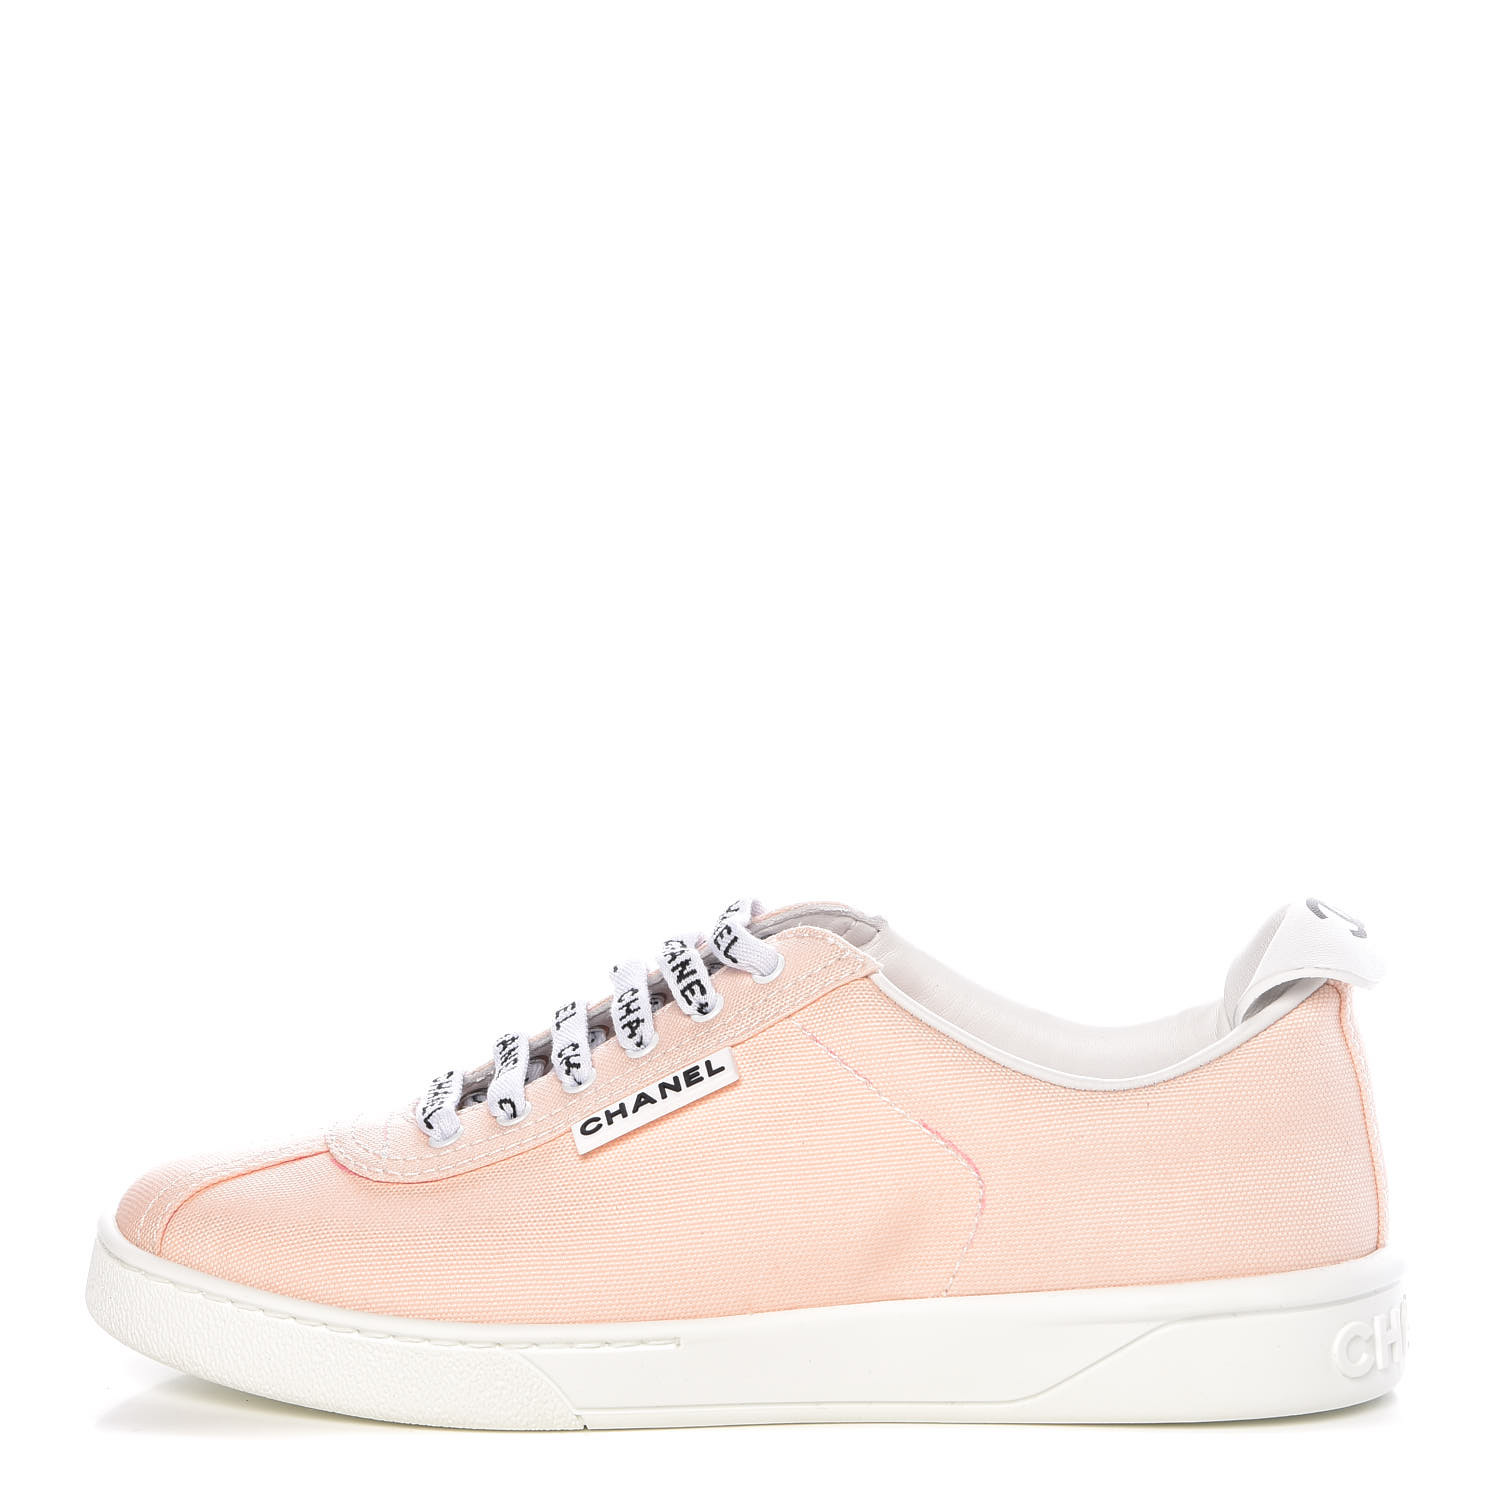 CHANEL Canvas Womens Sneakers 37 Light Pink 391632